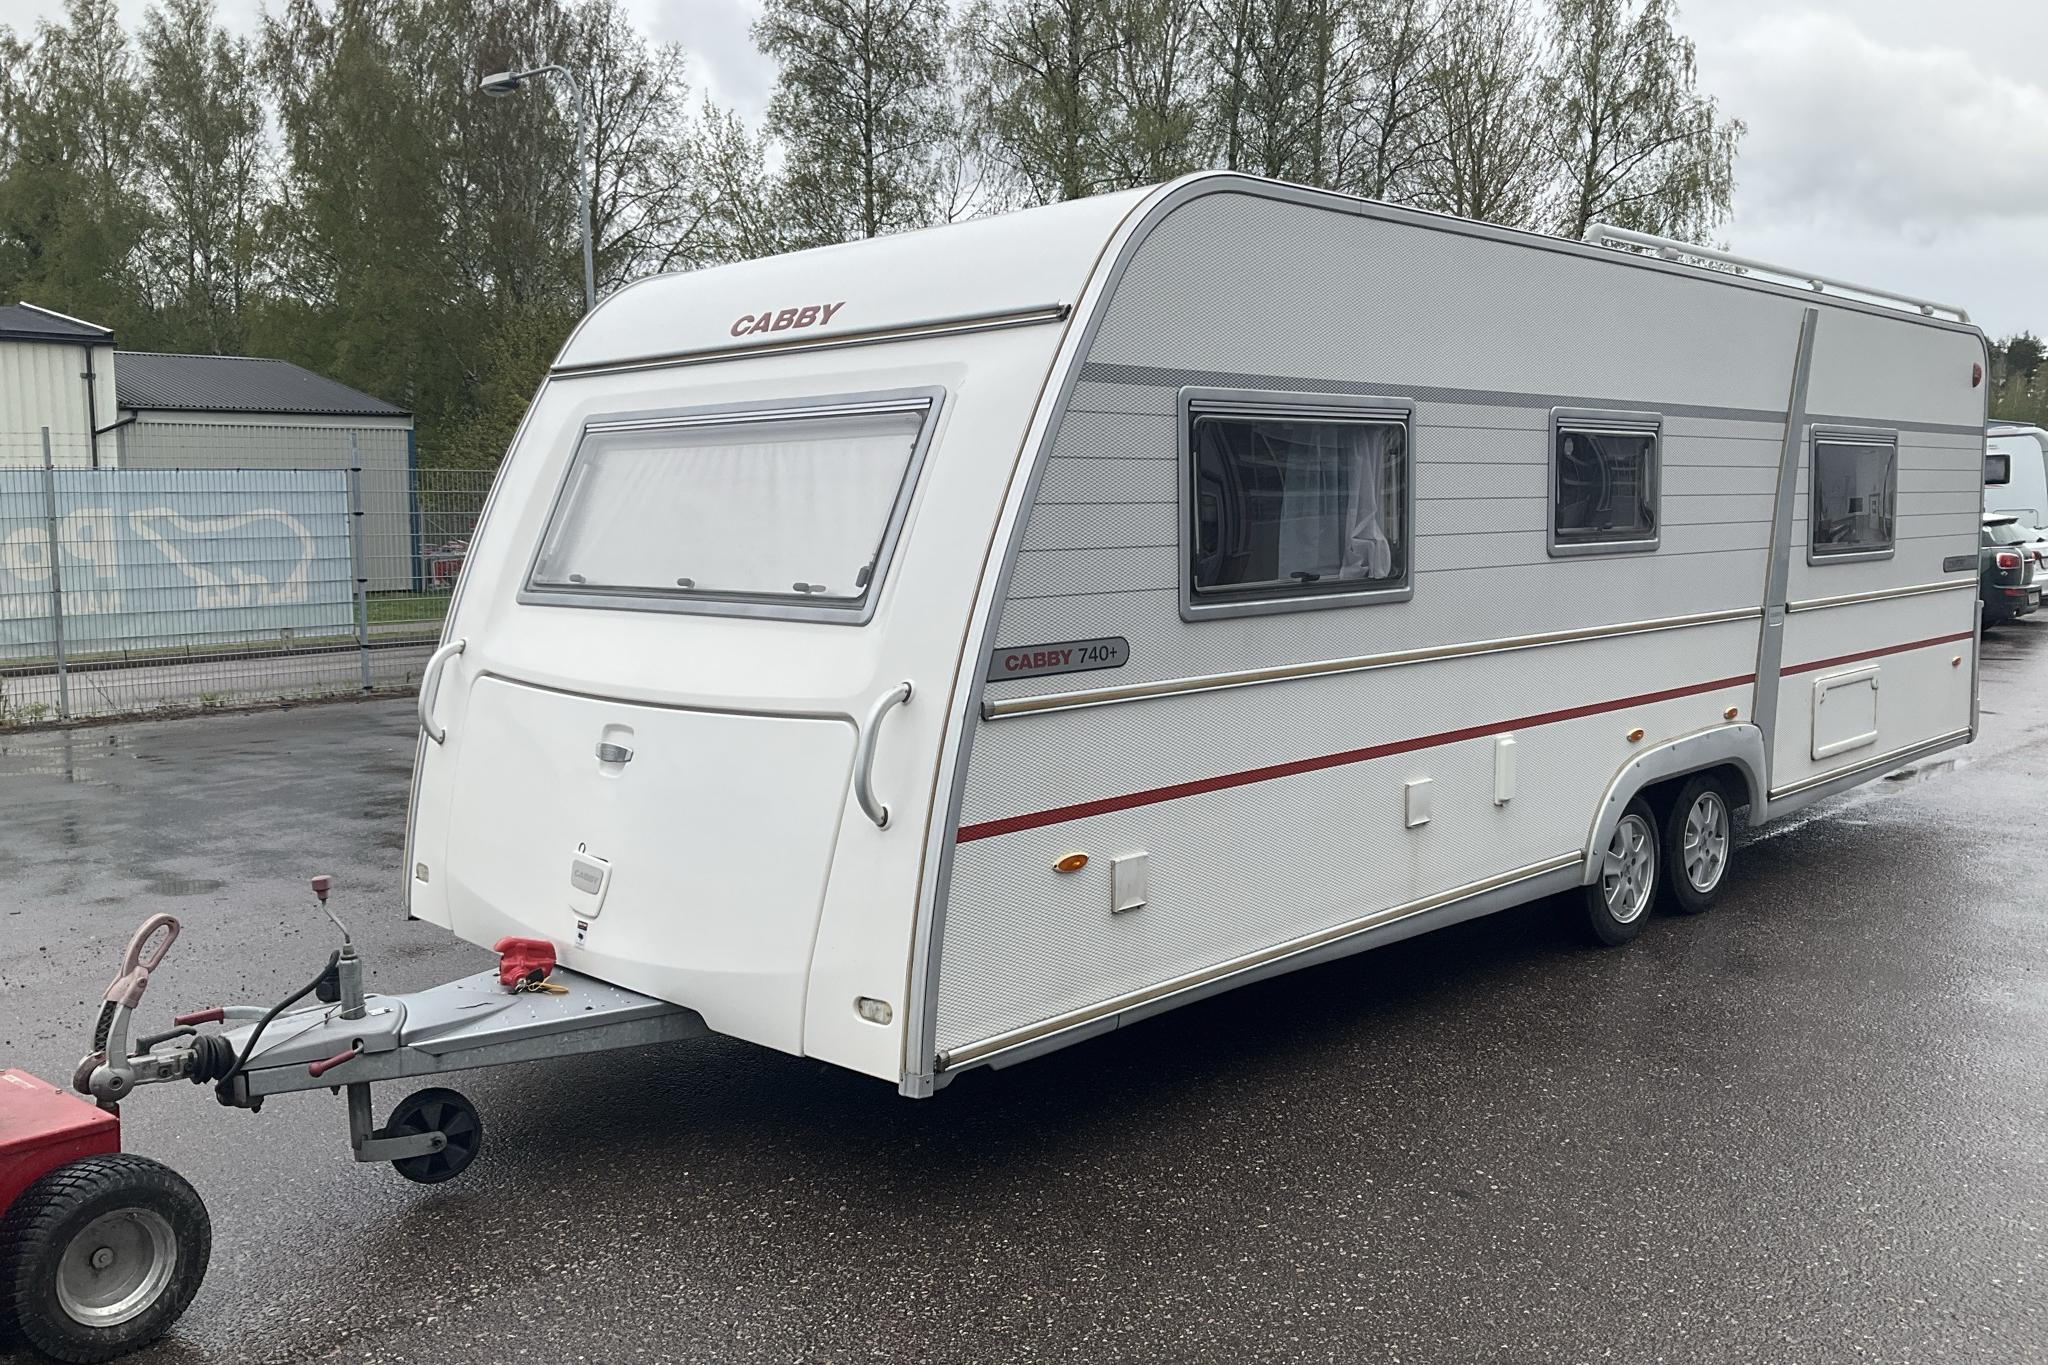 CABBY 740+FT COMFORT edition Husvagn - 0 km - white - 2007